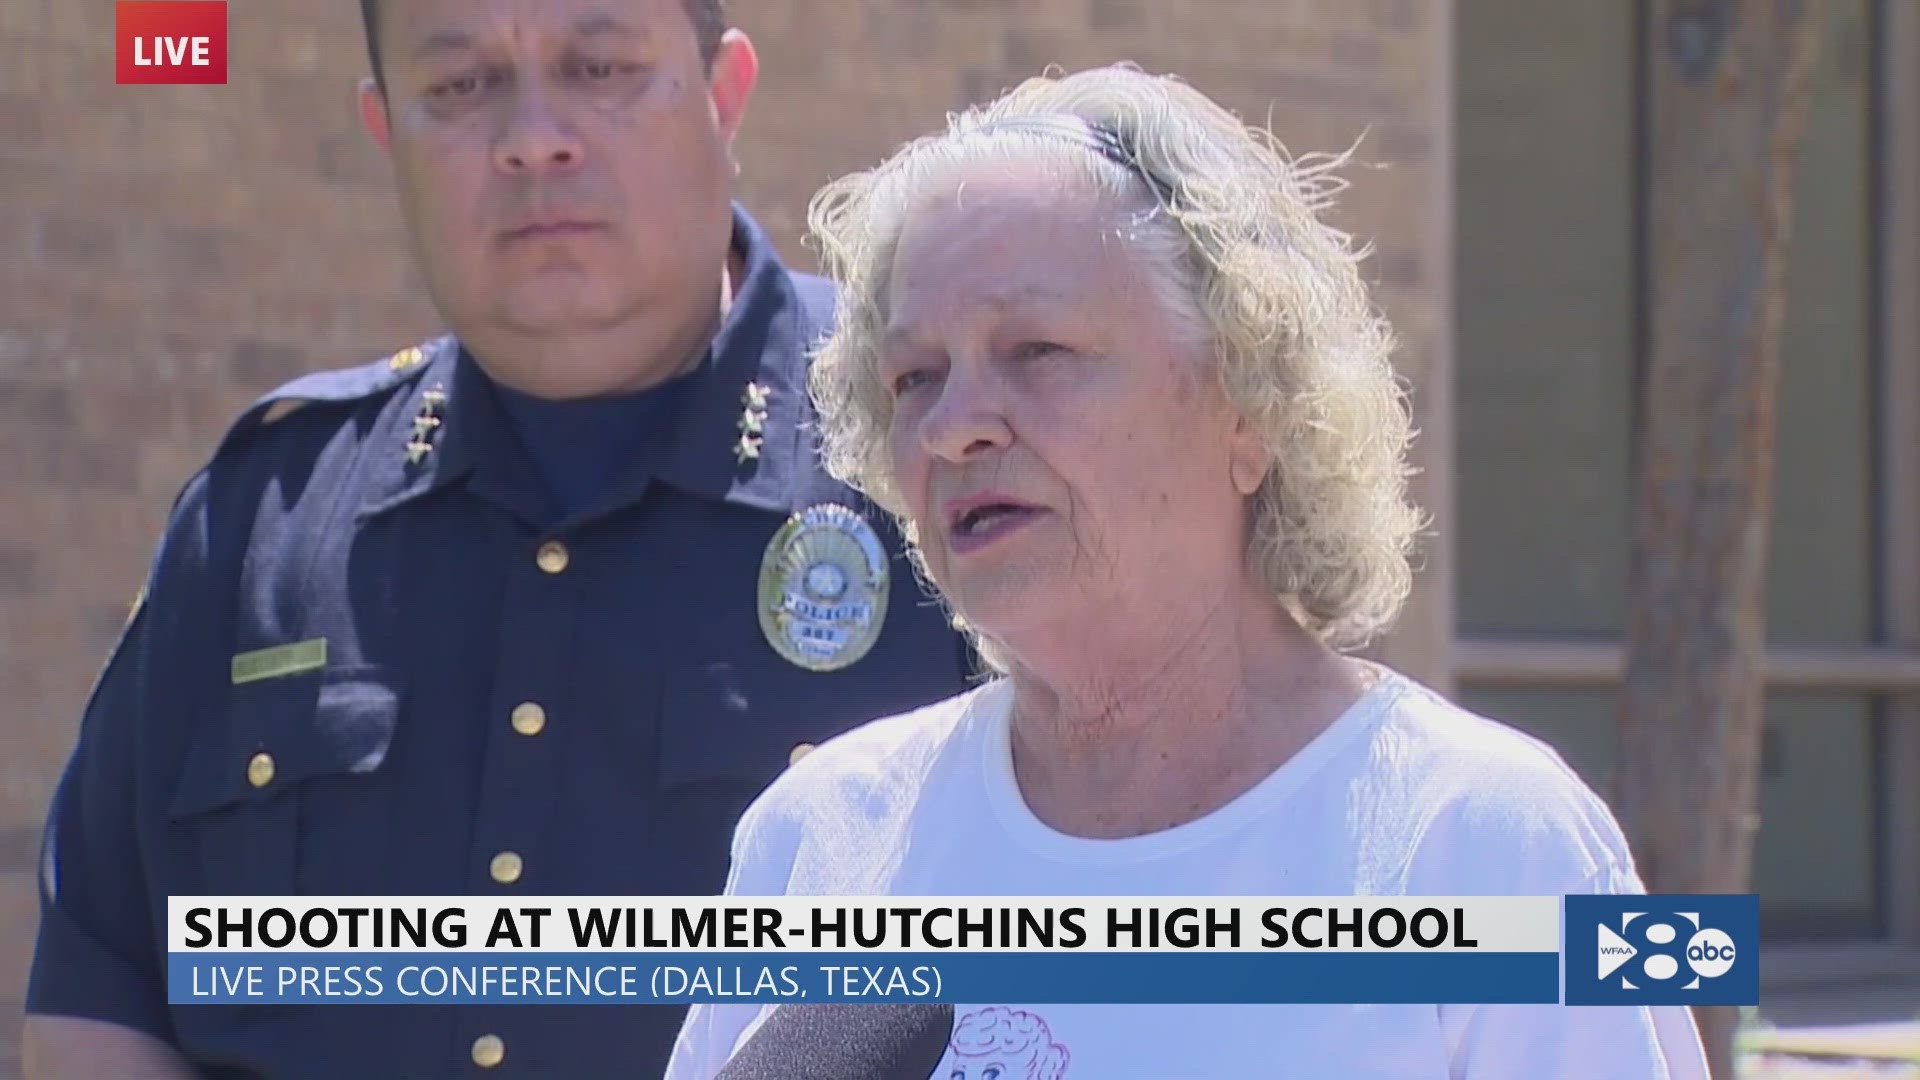 Wilmer, Texas, Mayor Sheila Petta spoke during a press conference Friday on the shooting at Wilmer-Hutchins High School.